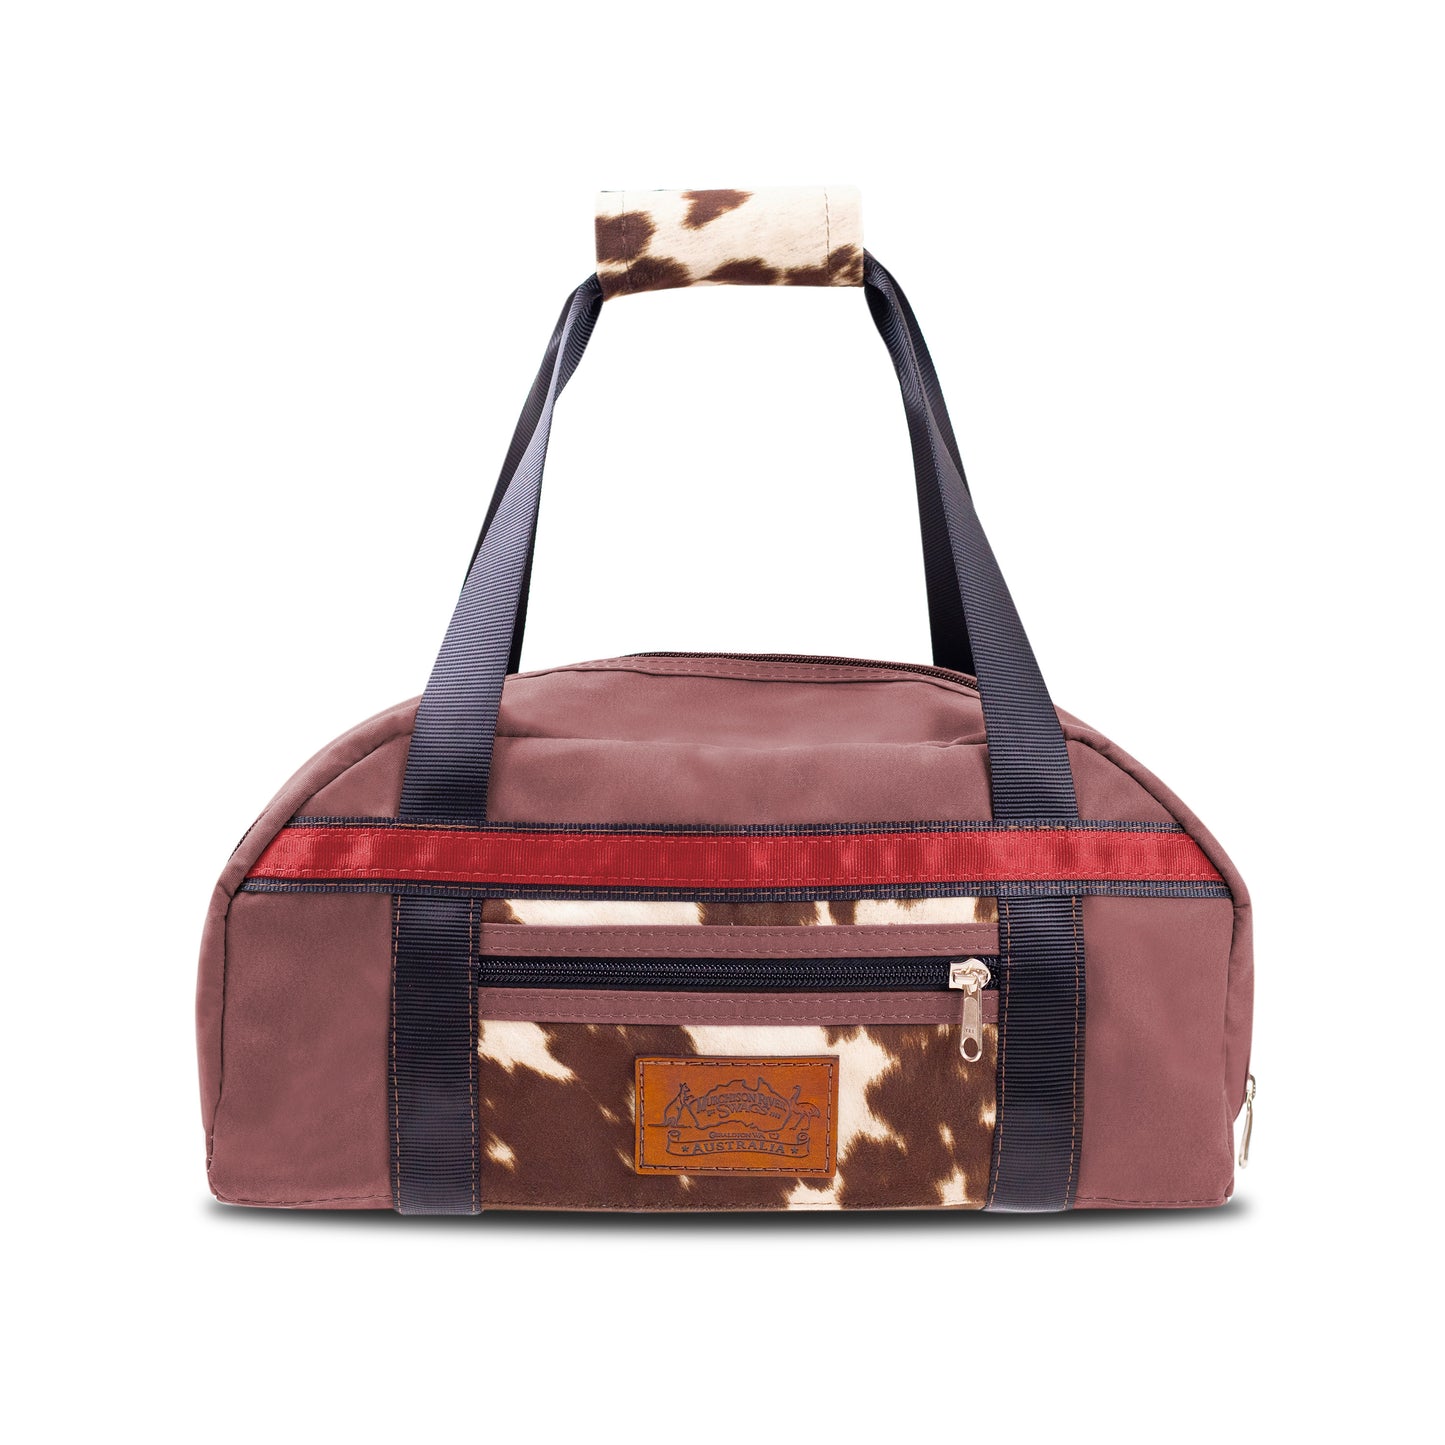 Burgundy Canvas Travel Bag with limited edition cow print fabric.